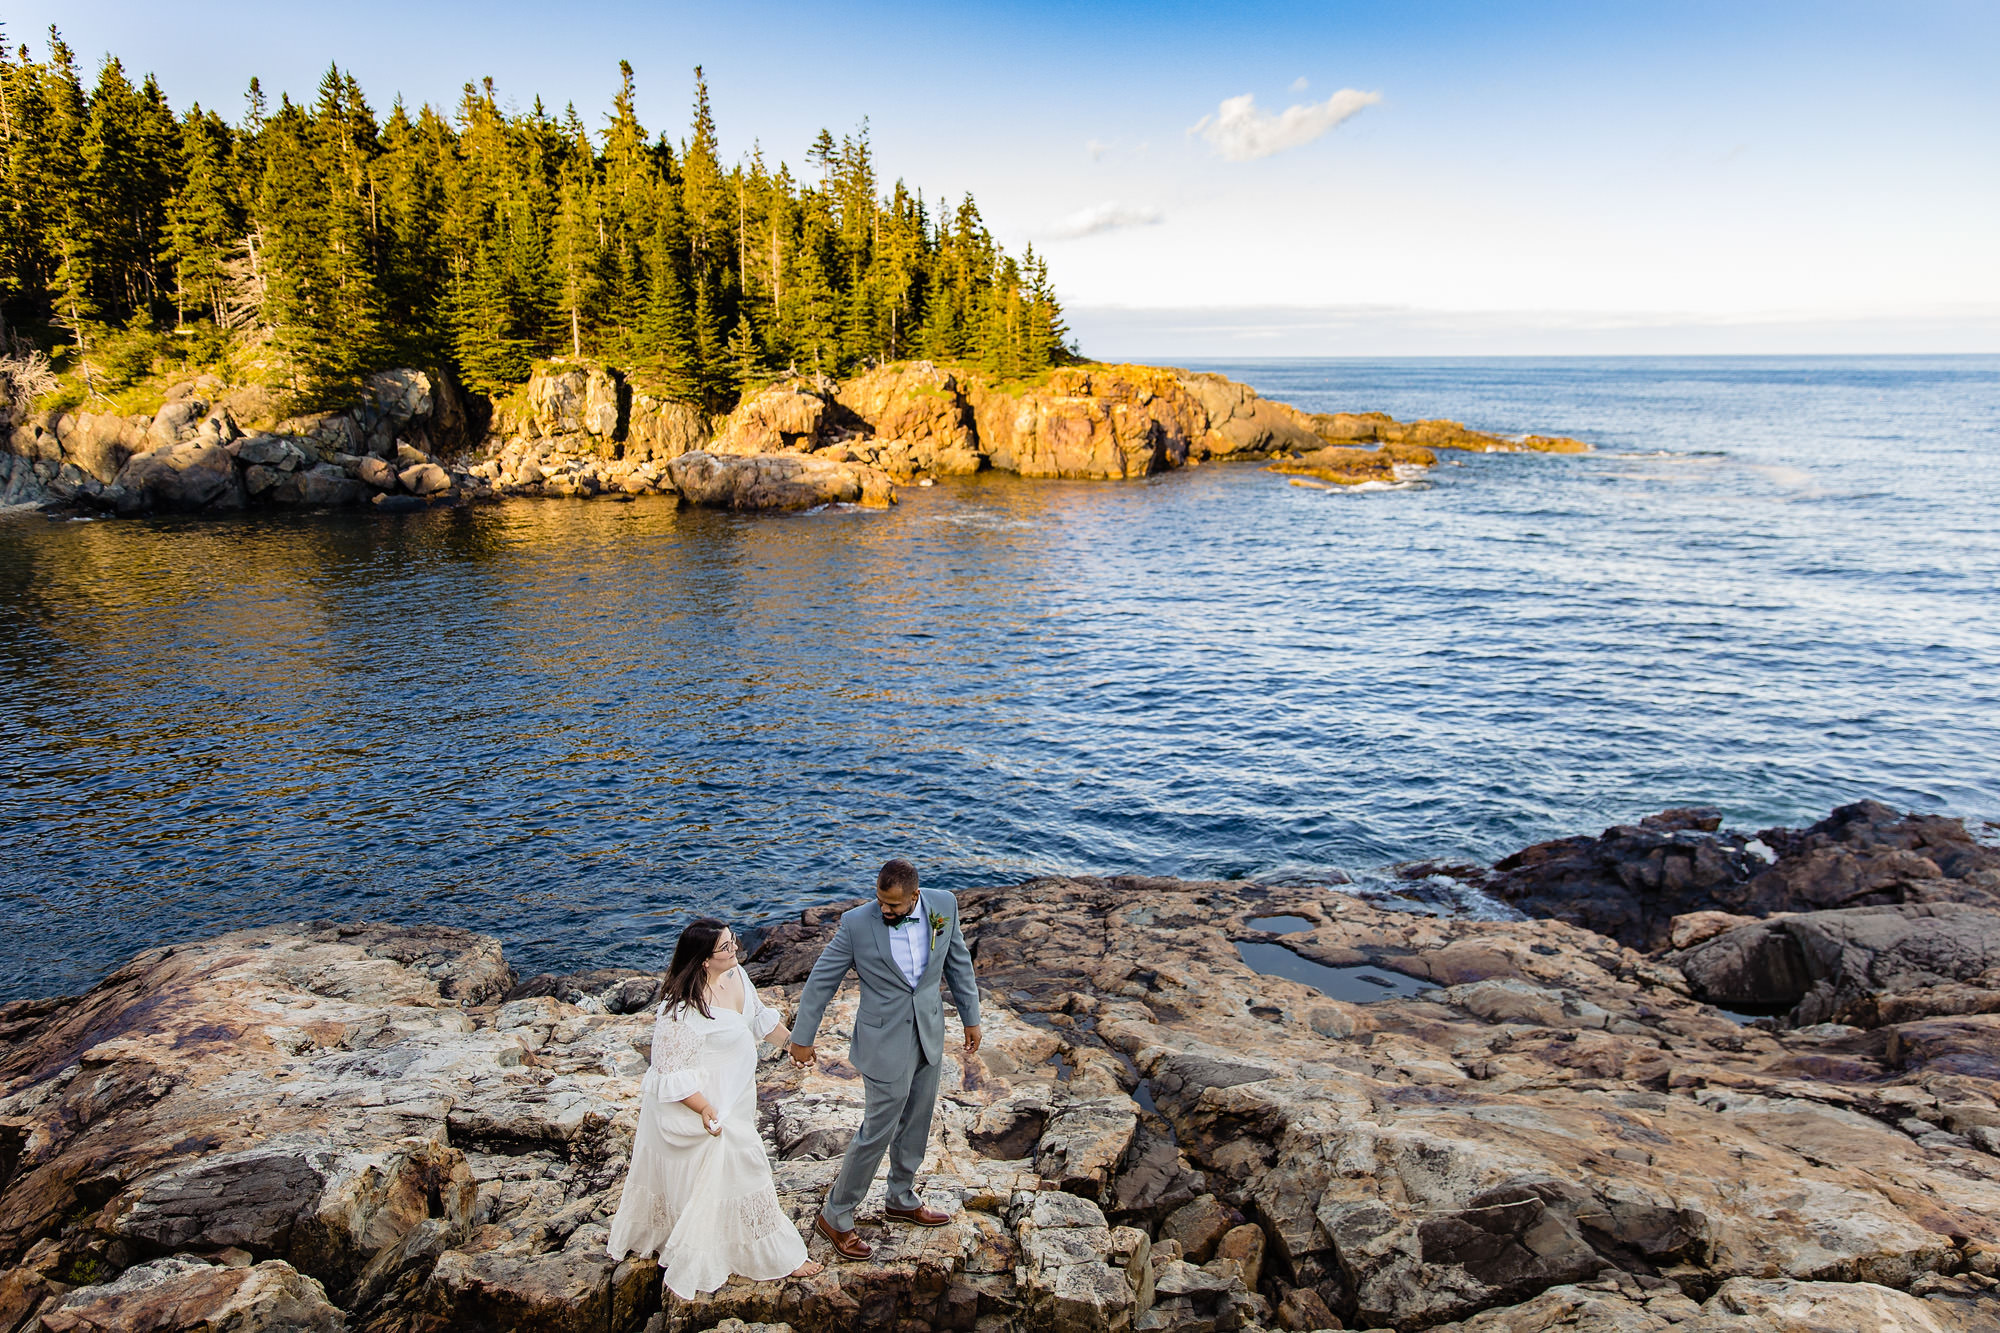 A first look on a rocky beach in Acadia National Park